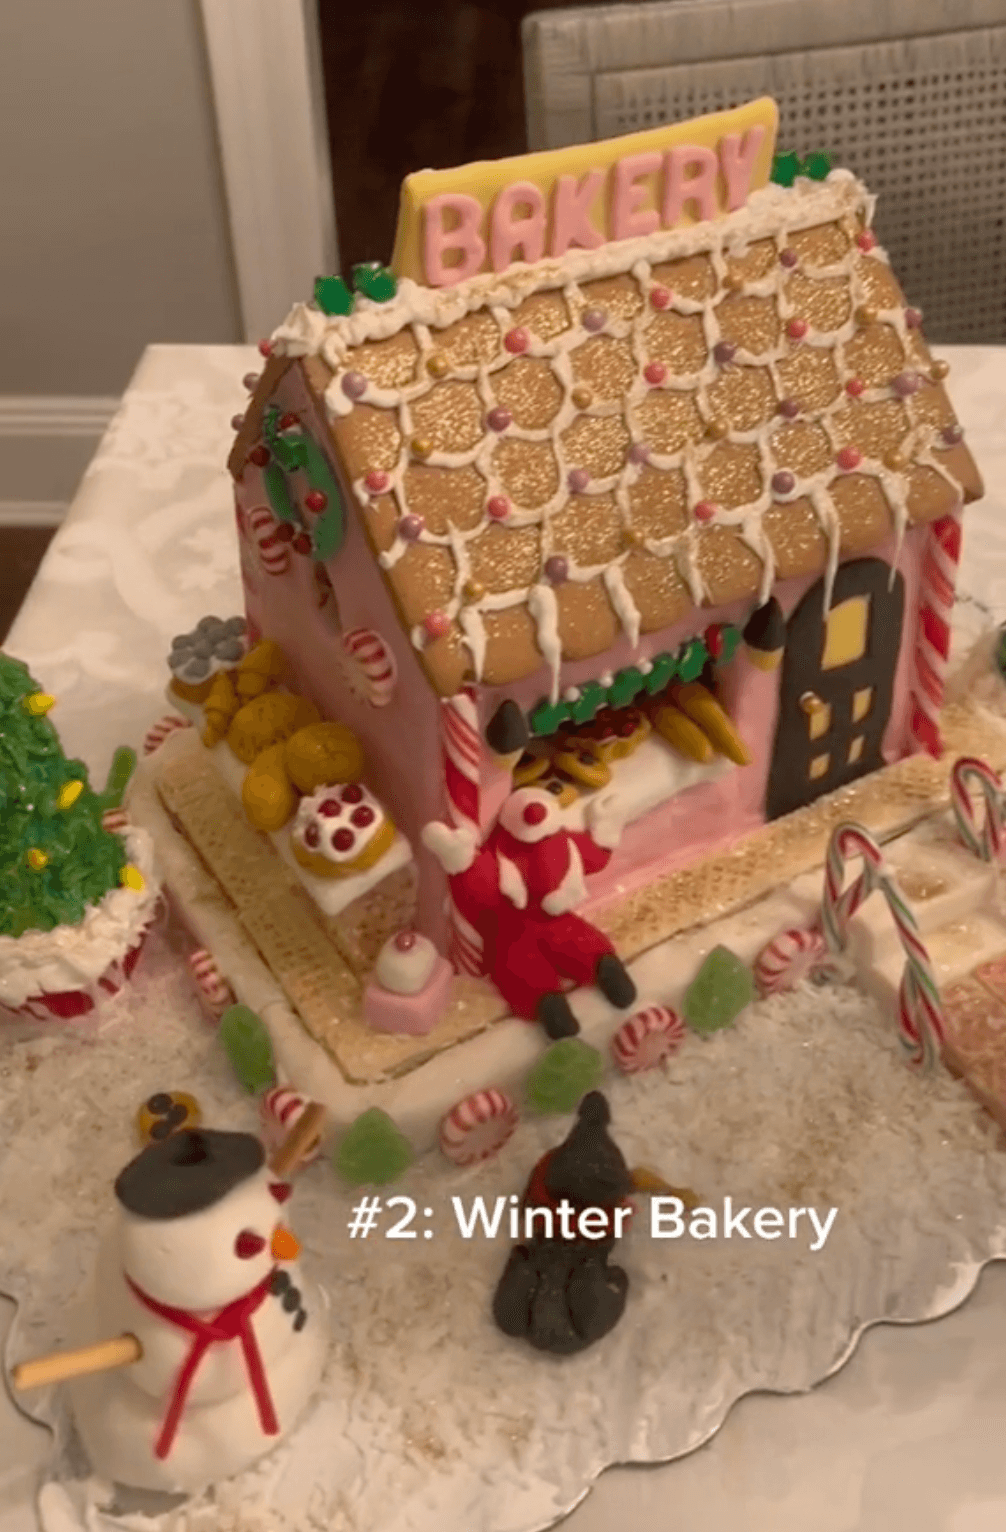 The winner of this year's gingerbread contest: Winter bakery. (Courtesy of Alexia Lucas)